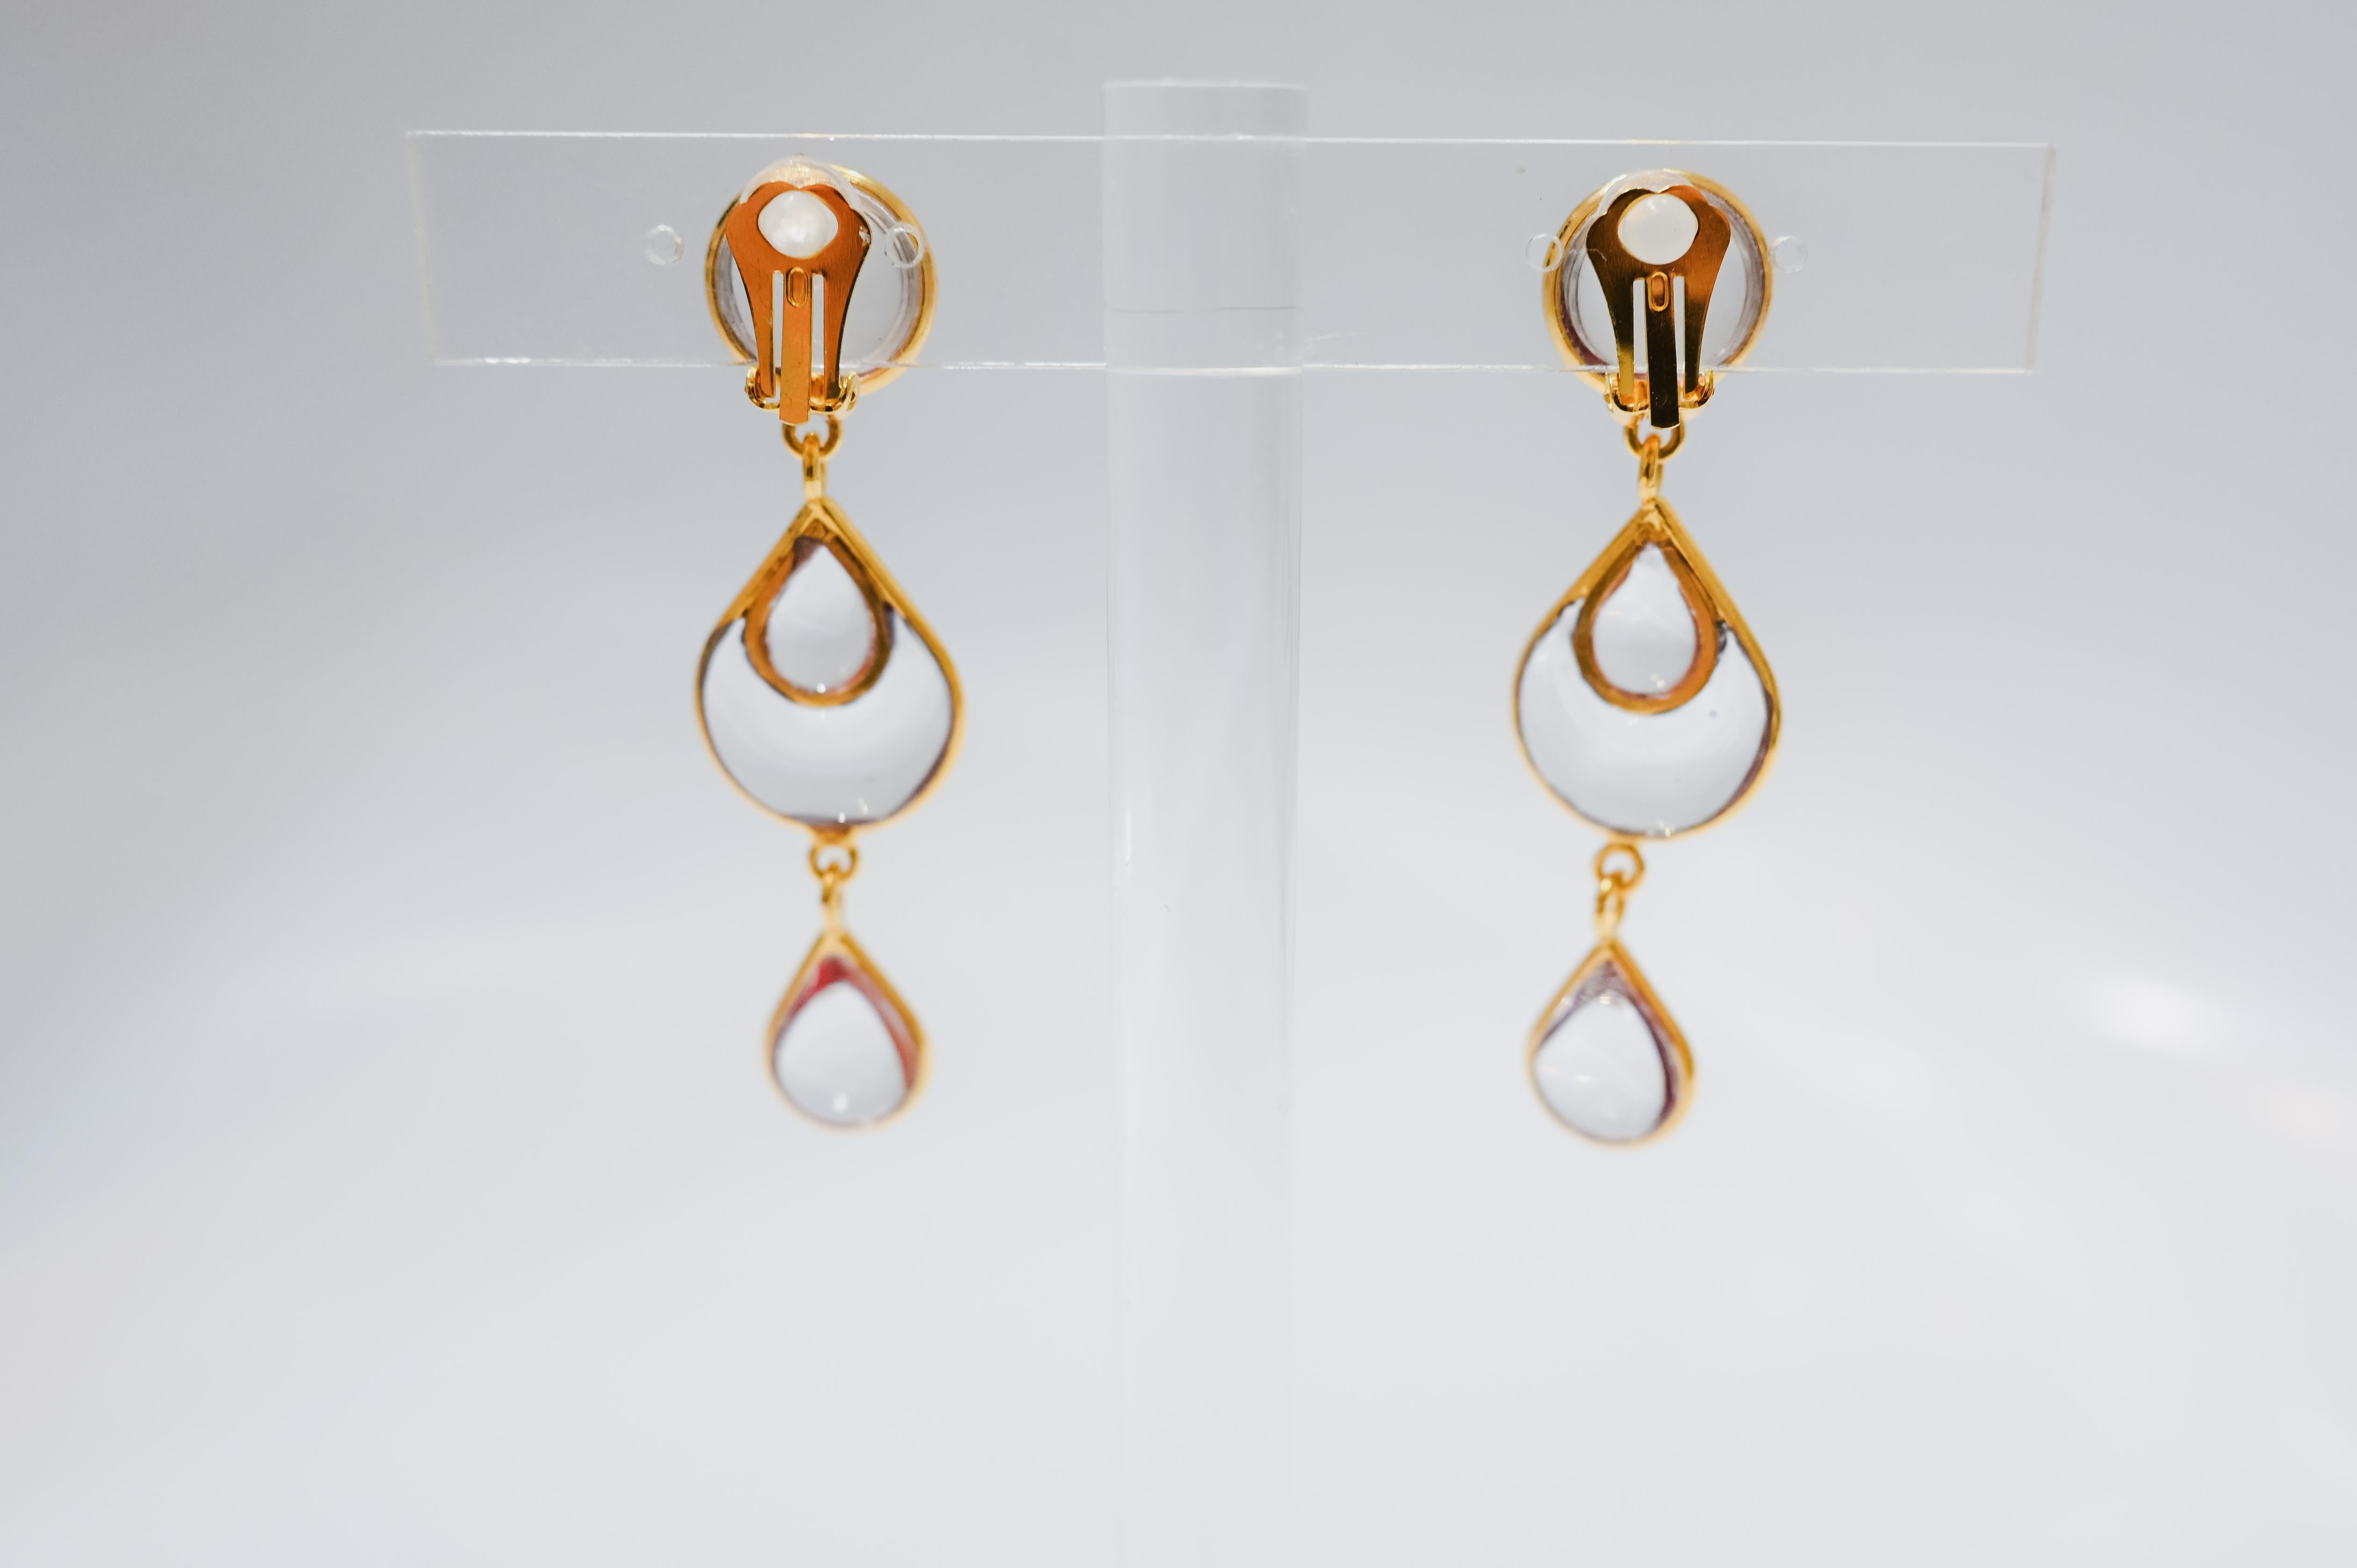 Design by Françoise Montague. Gripoix work by former artisans of the atelier. Clip earrings Gripoix work ( famed pate de verre  for the House of Chanel) was used for these oval shaped drop earrings. Poured glass in clear, gilded brass 

Francoise